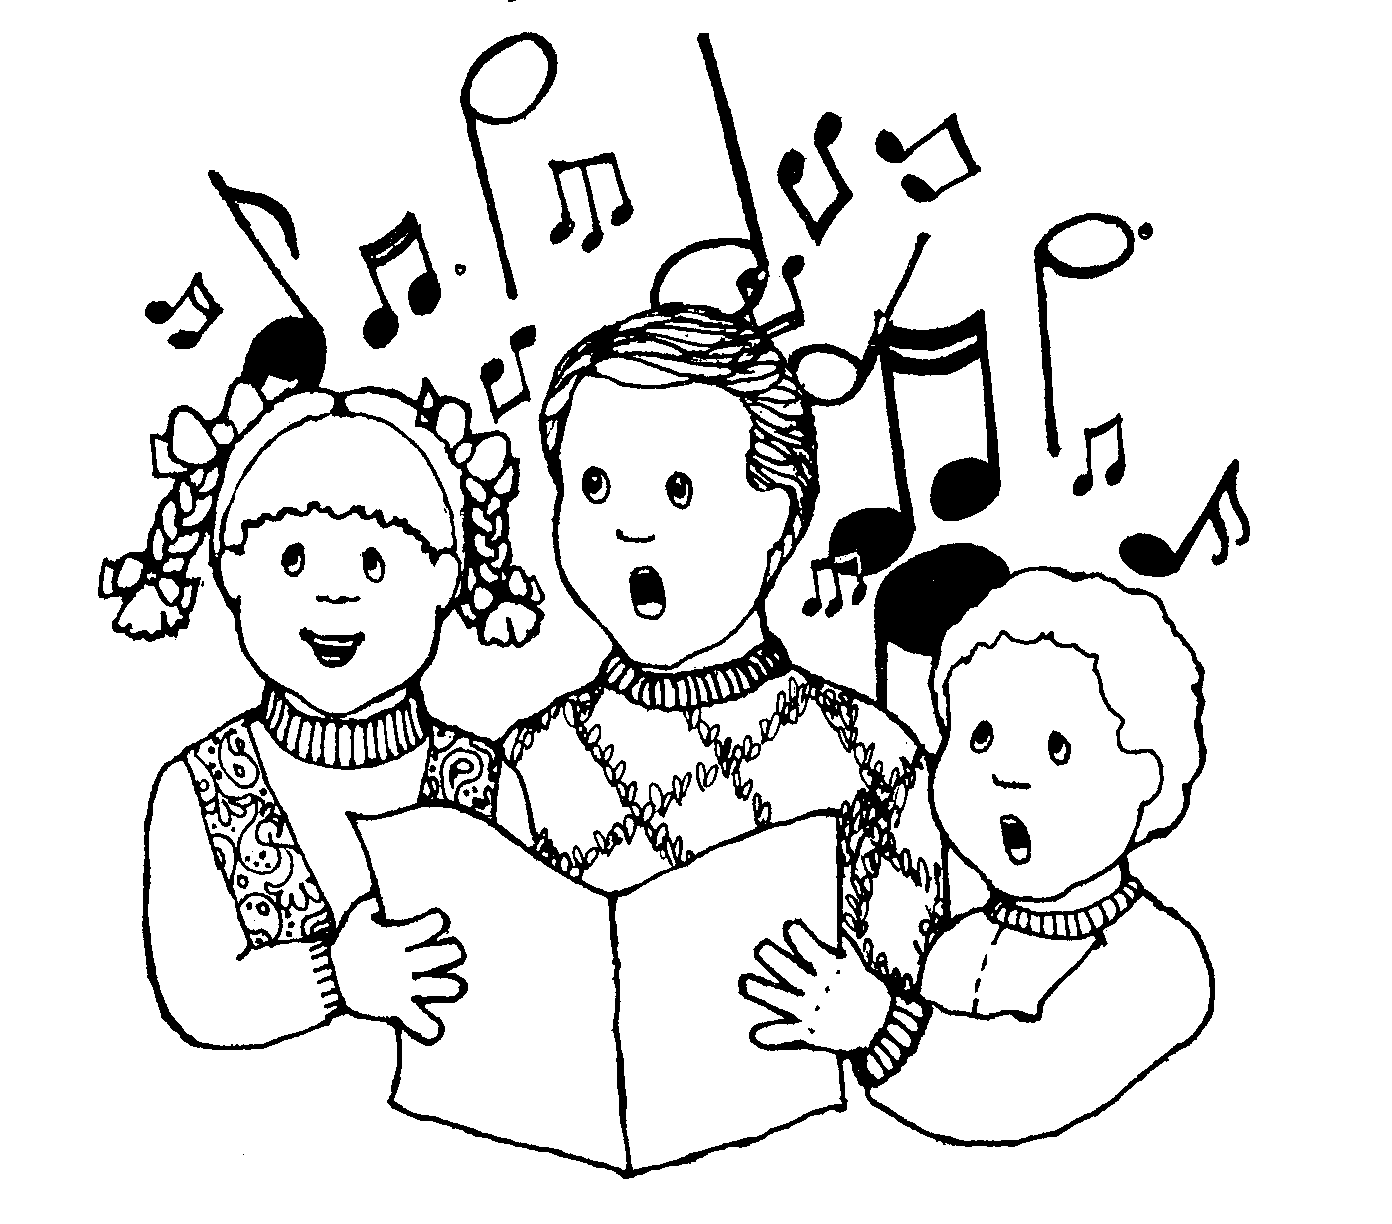 Choir clipart black and white. Caroling archives mormon share